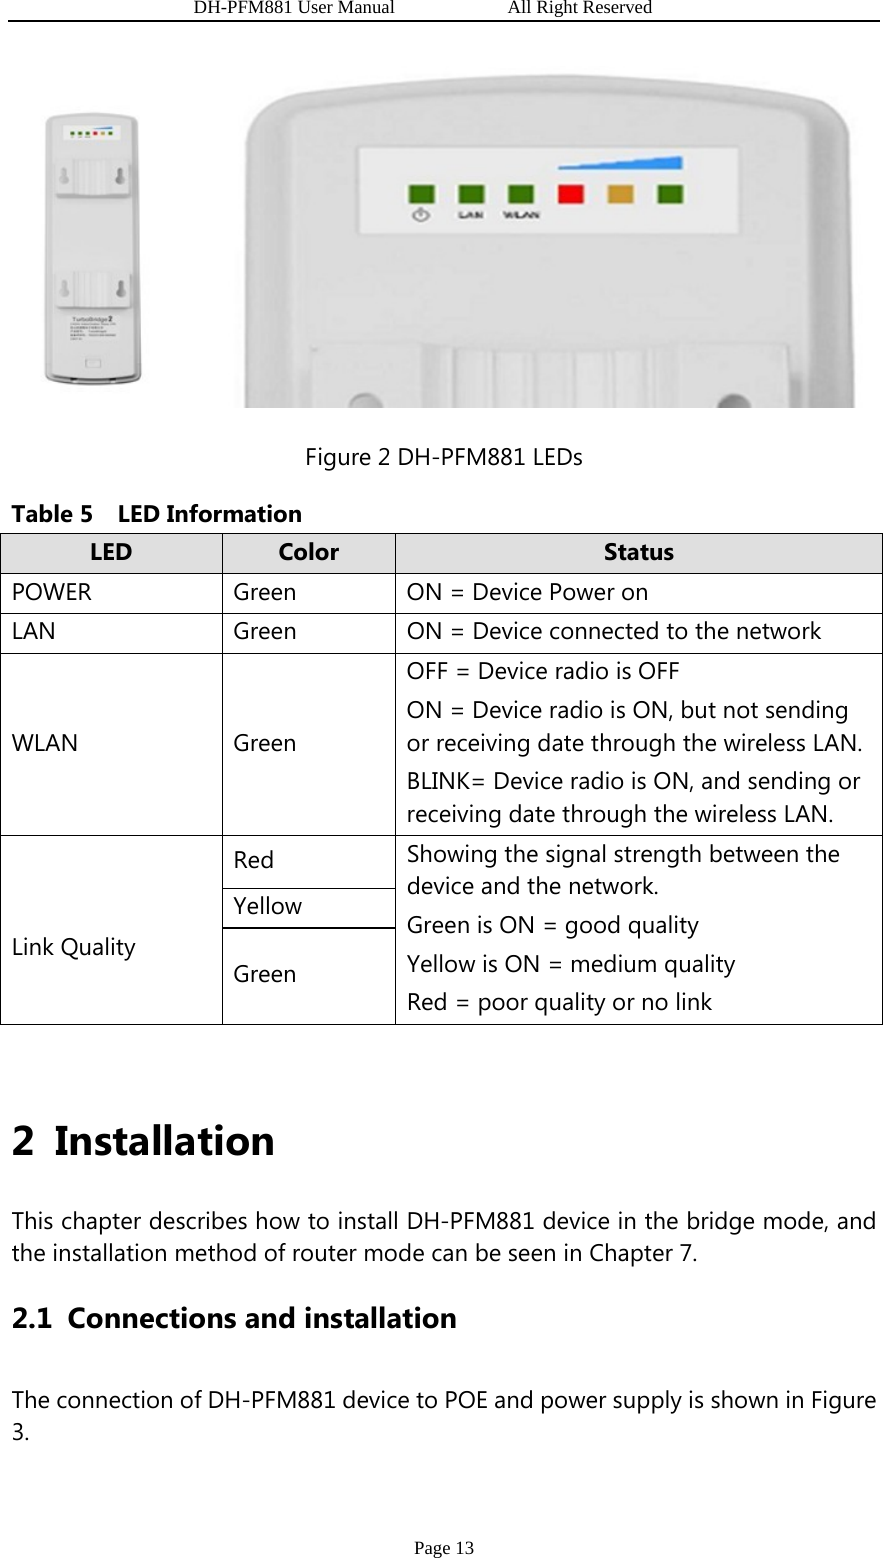                   DH-PFM881 User Manual            All Right Reserved Page 13  Figure 2 DH-PFM881 LEDs   Table 5  LED Information LED  Color  Status POWER  Green  ON = Device Power on LAN  Green  ON = Device connected to the network WLAN Green OFF = Device radio is OFF ON = Device radio is ON, but not sending or receiving date through the wireless LAN. BLINK= Device radio is ON, and sending or receiving date through the wireless LAN.  Link Quality Red  Showing the signal strength between the device and the network. Green is ON = good quality Yellow is ON = medium quality Red = poor quality or no link Yellow Green  2 Installation This chapter describes how to install DH-PFM881 device in the bridge mode, and the installation method of router mode can be seen in Chapter 7. 2.1 Connections and installation The connection of DH-PFM881 device to POE and power supply is shown in Figure 3. 